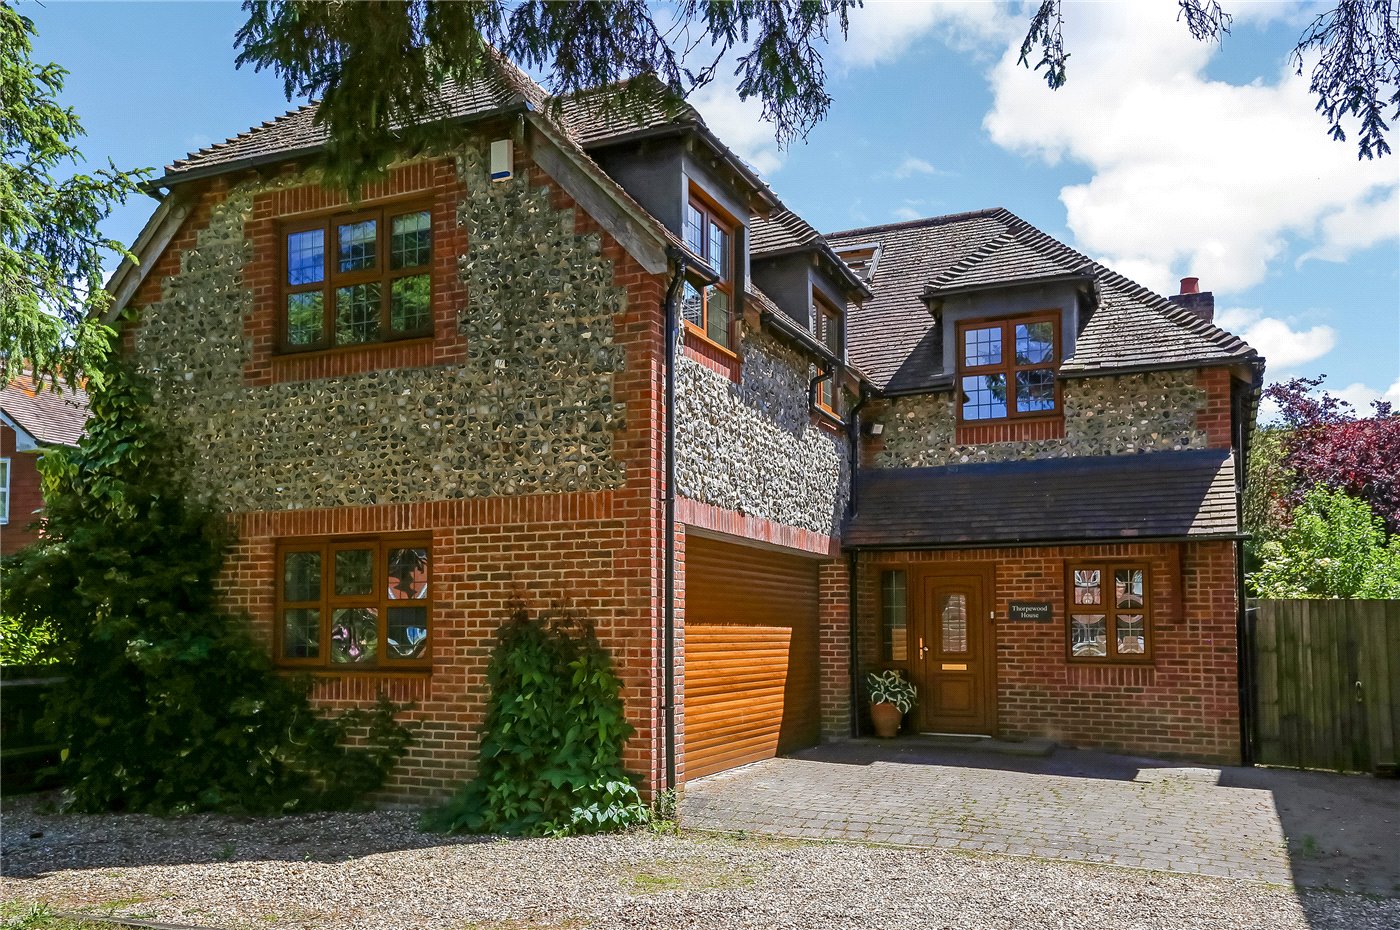 South Drive, Littleton, Winchester, Hampshire, SO22